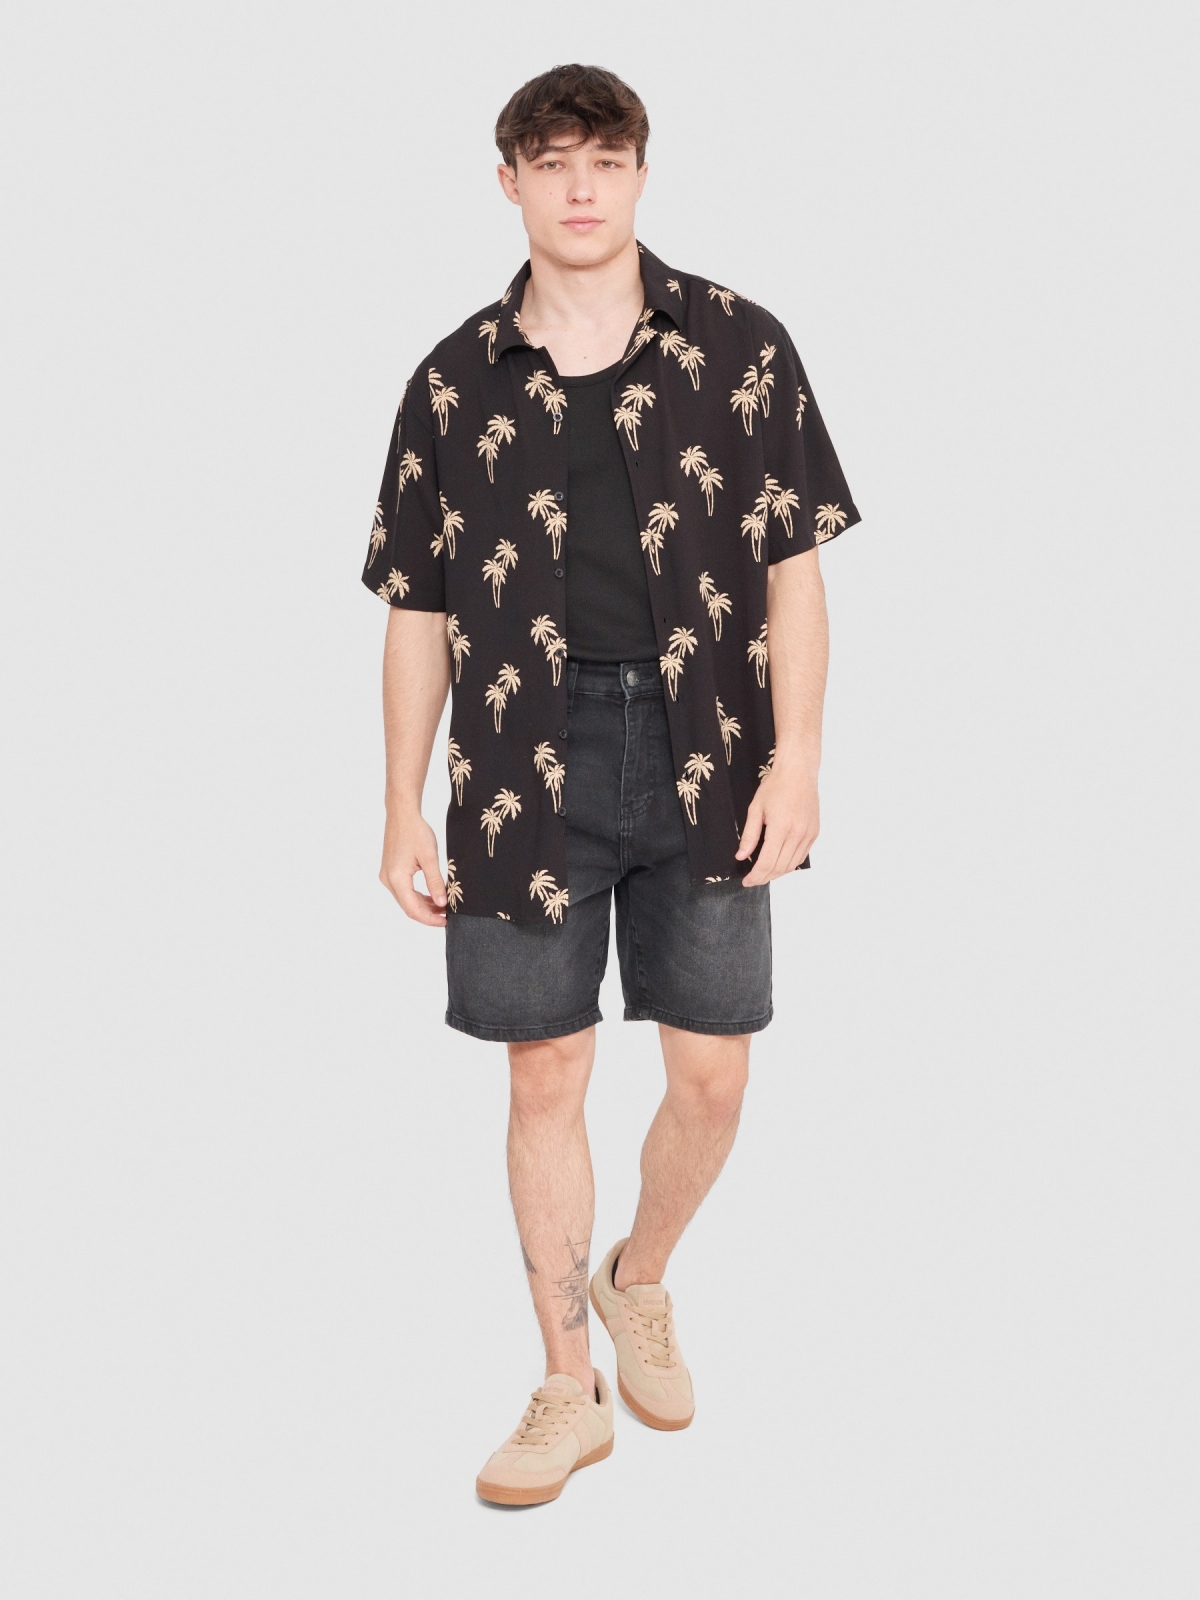 Shirt palm trees black front view